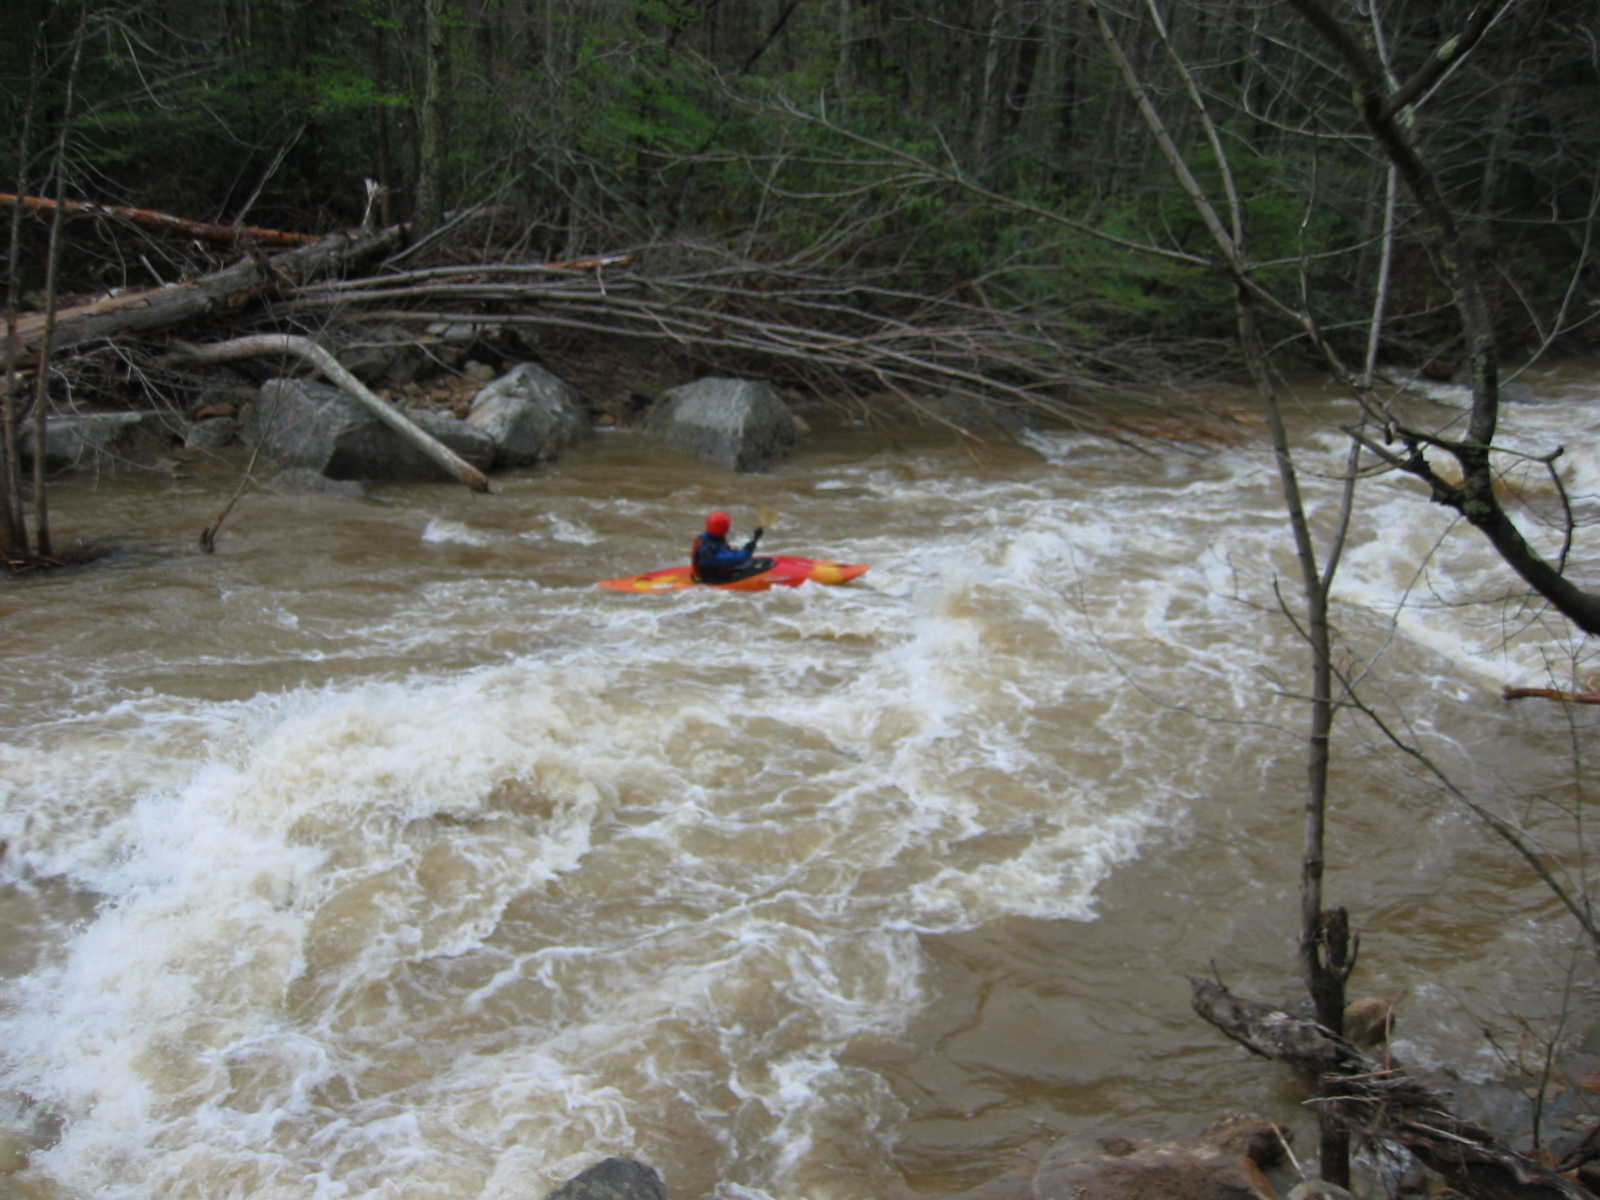 Bob Maxey in runout of the big South Fork rapid (Photo by Lou Campagna - 4/26/04)